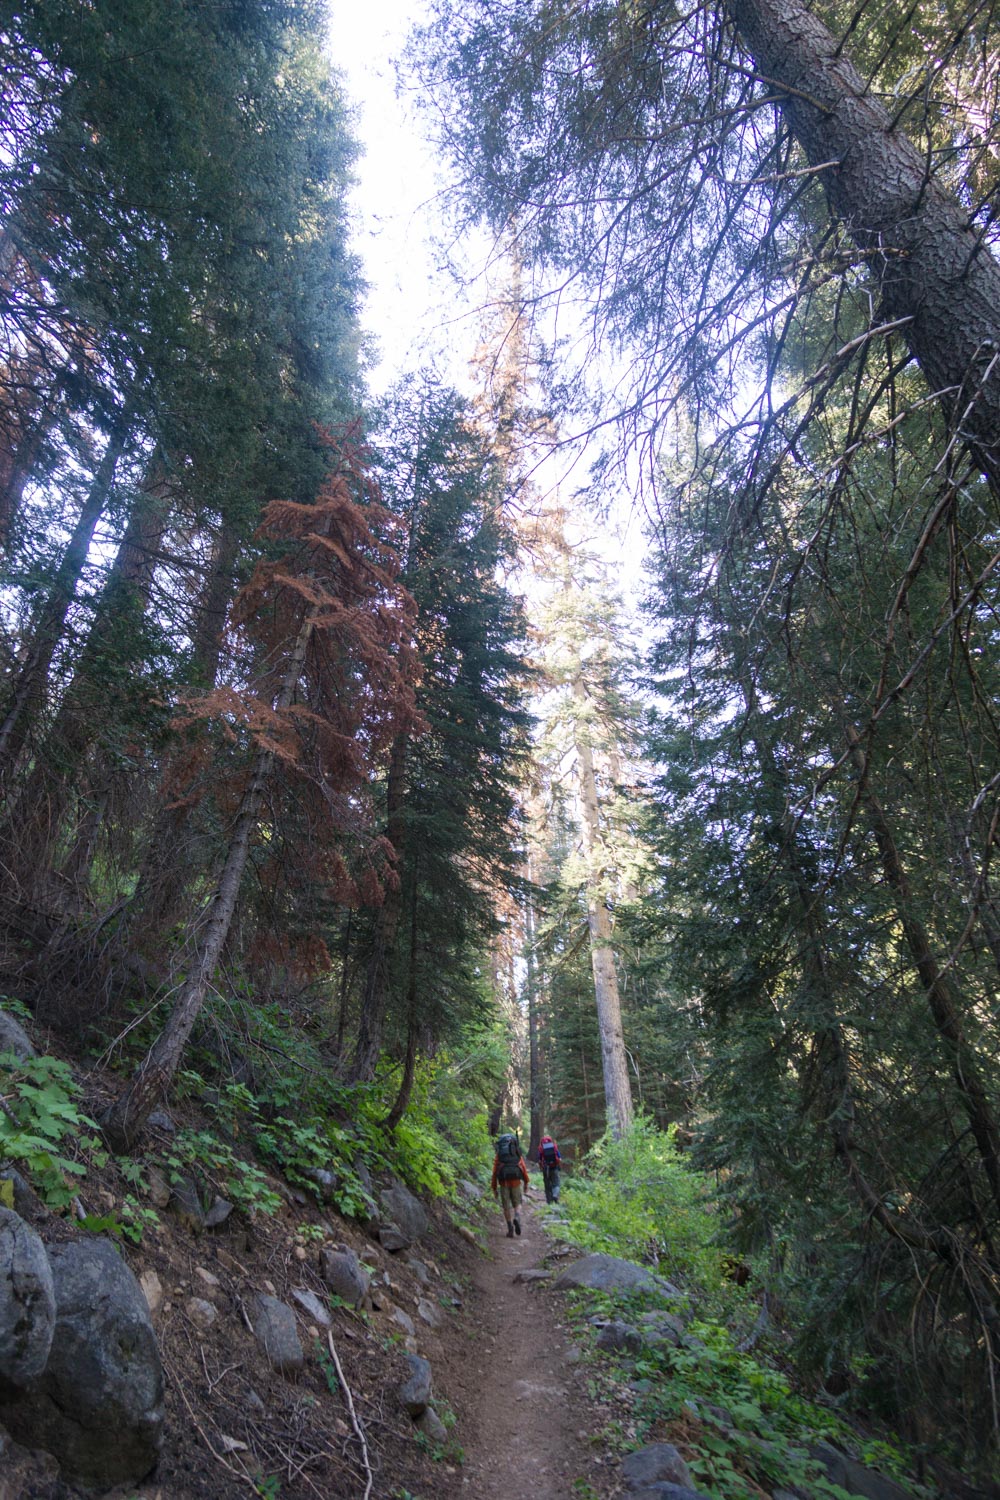 Backpacking through Sequoia National Park